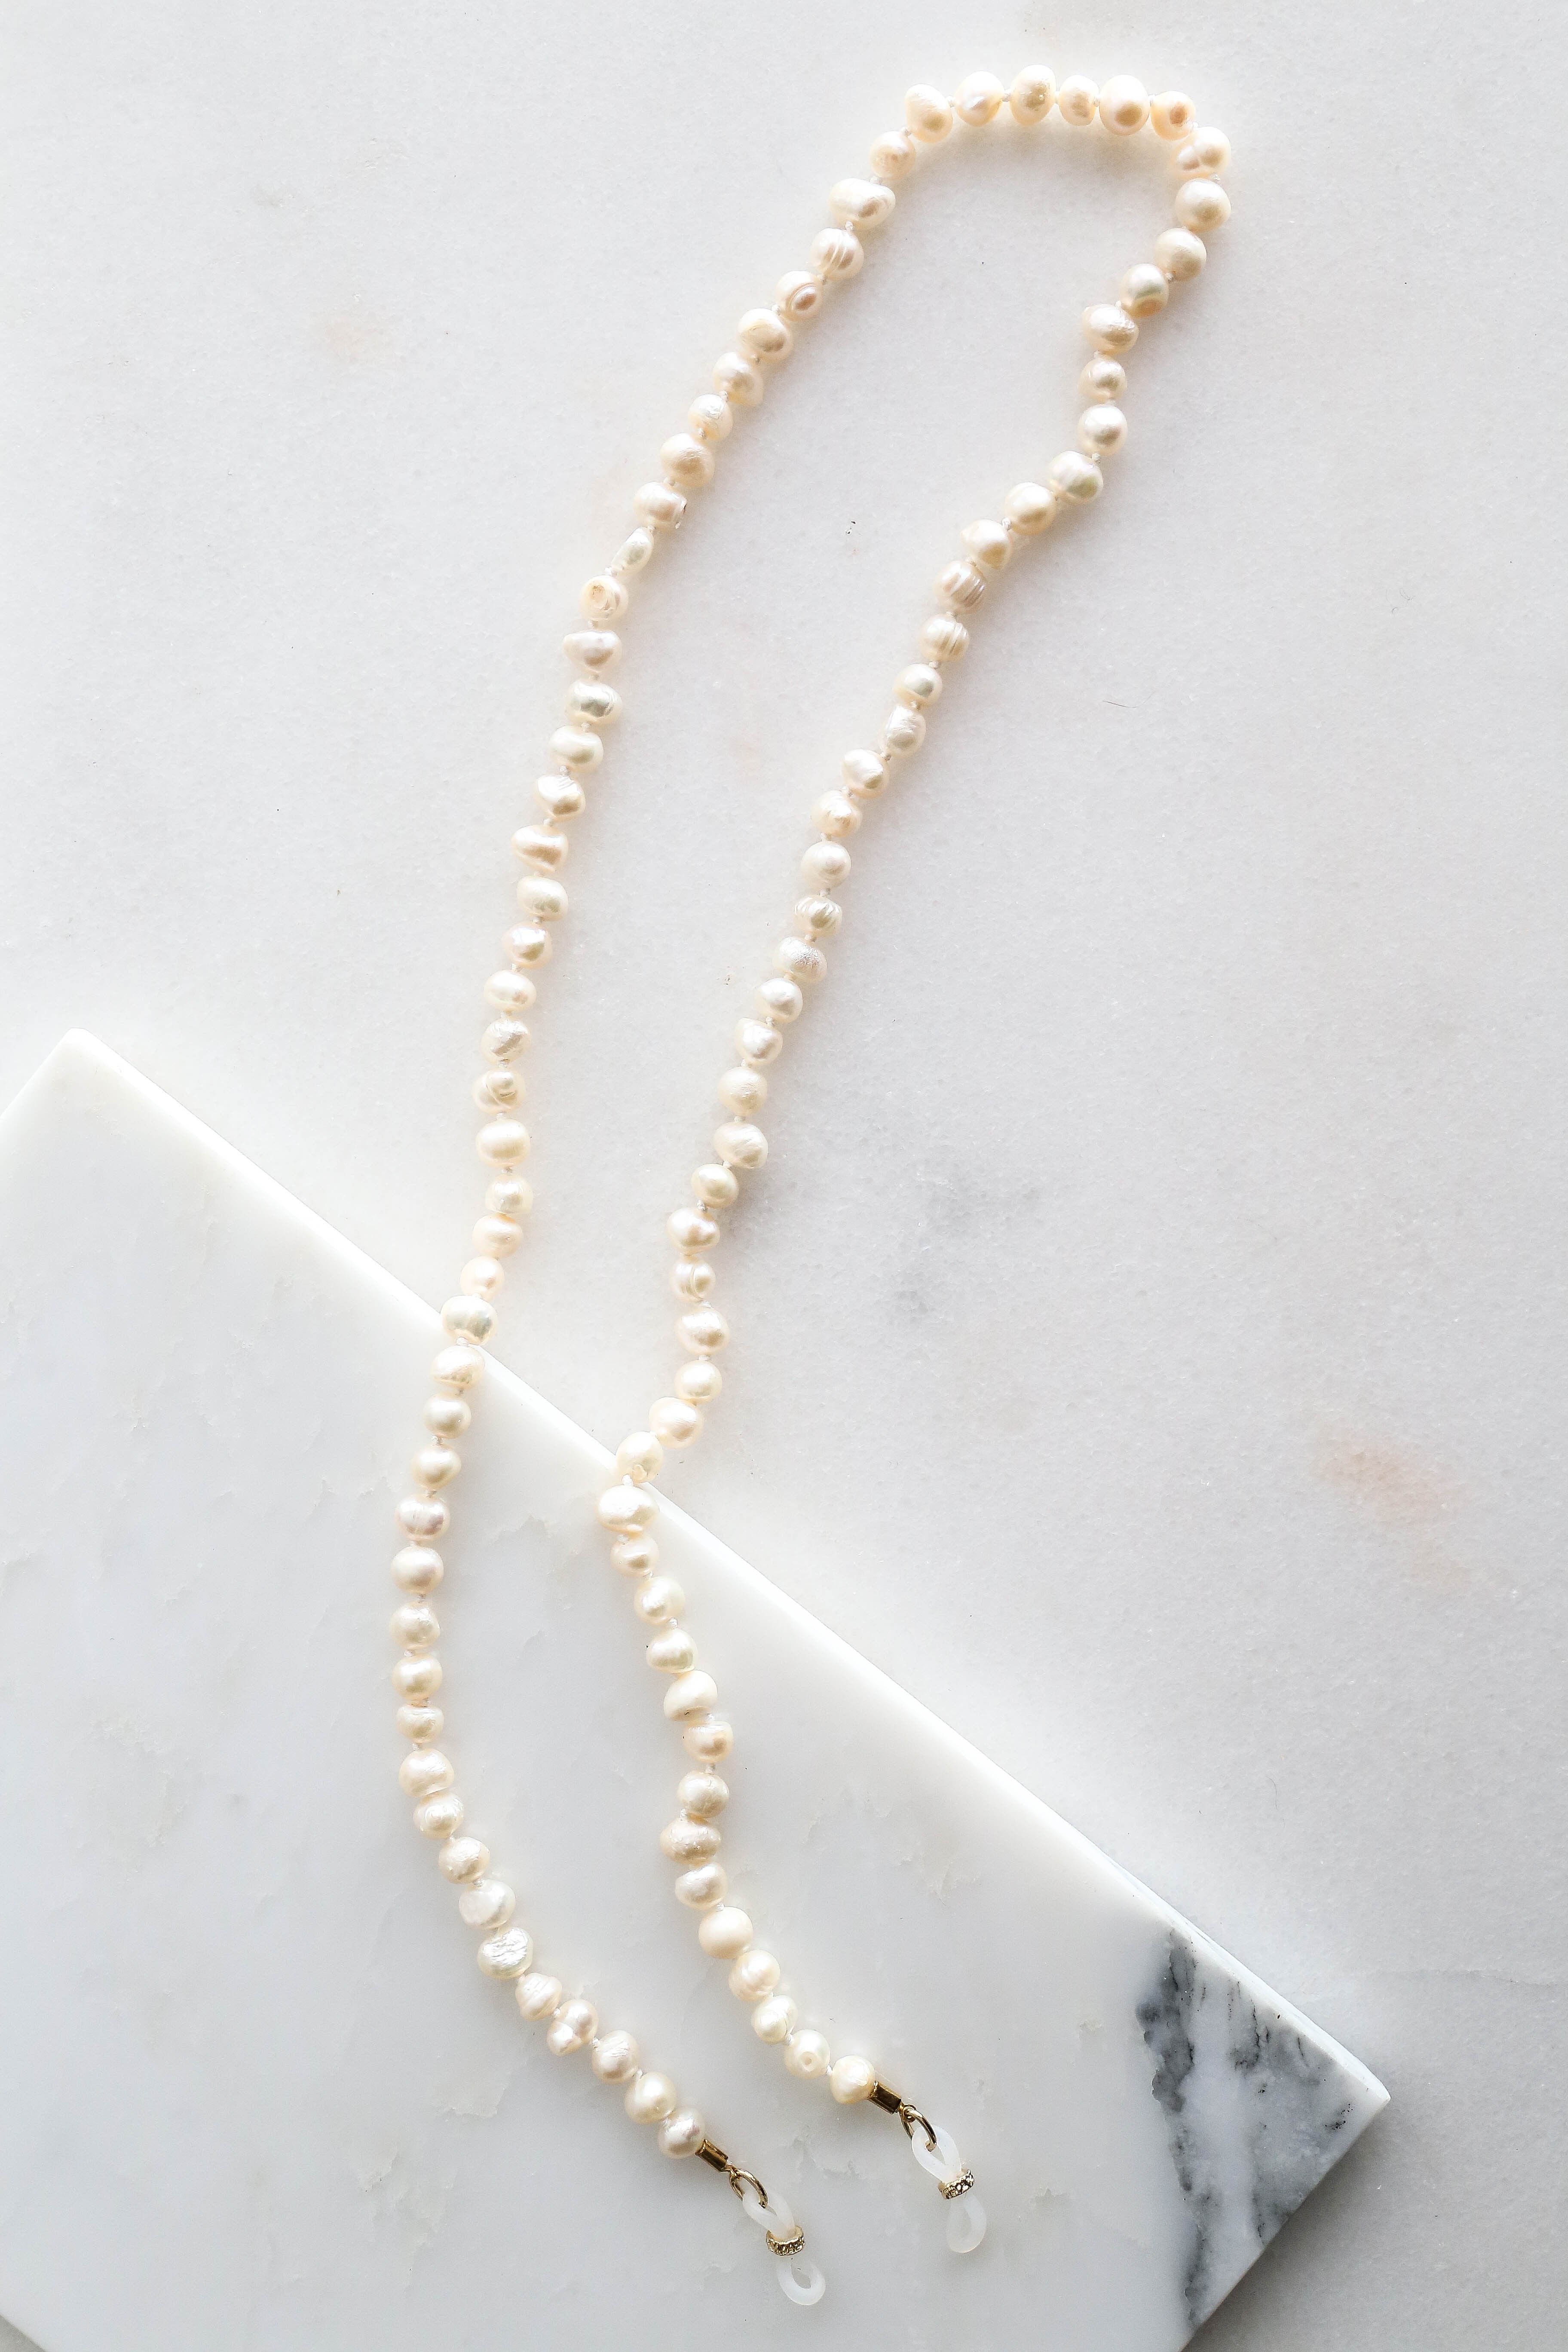 Pearls - Sunglasses Chain - Boutique Minimaliste has waterproof, durable, elegant and vintage inspired jewelry